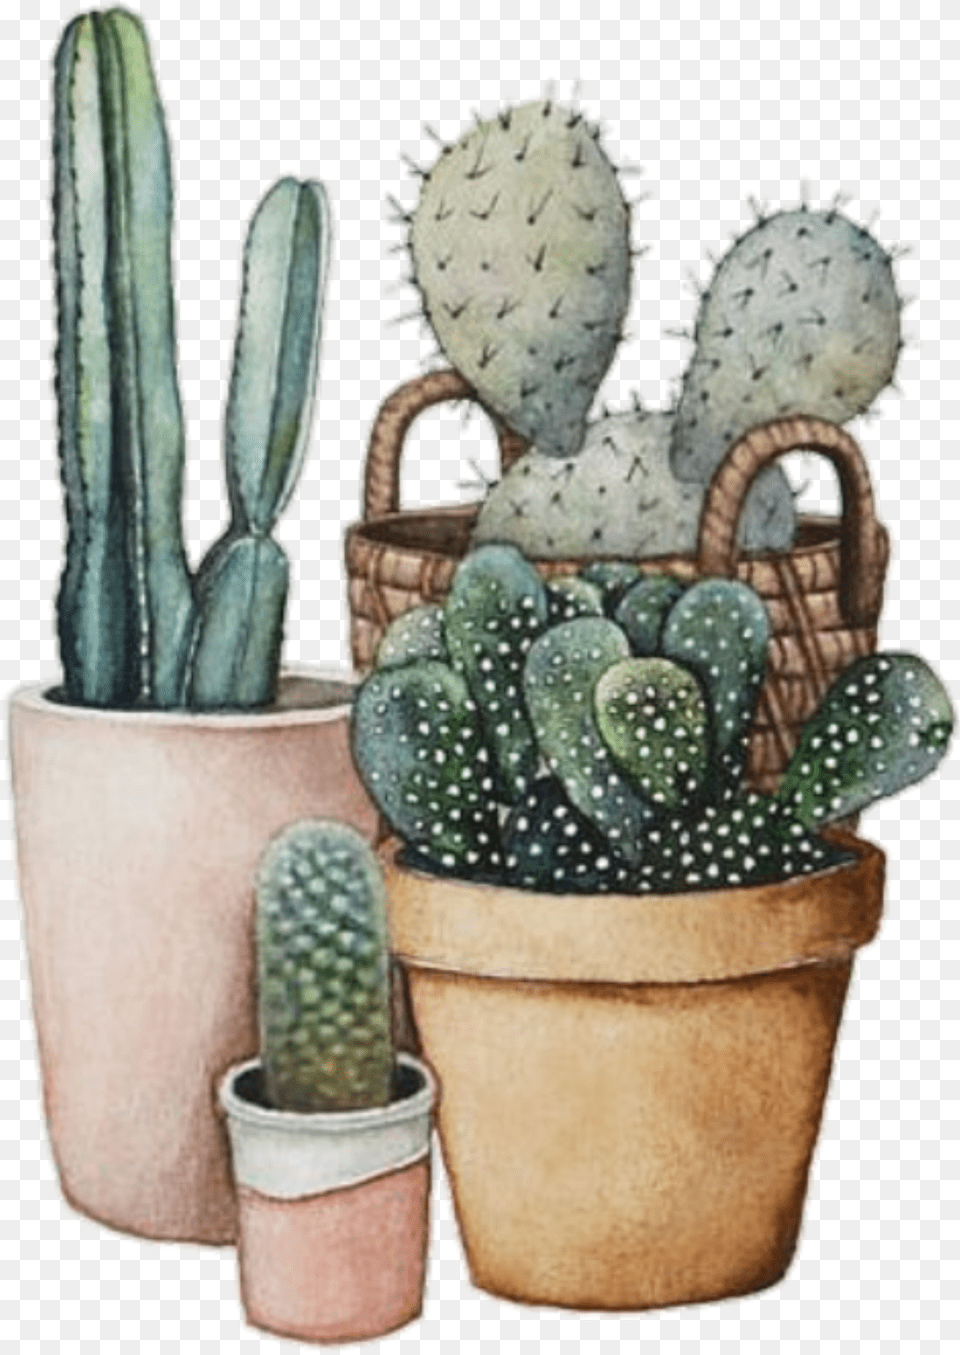 Cacti Tumblr Plant Drawing Friends Plants Are Watercolor Succulents In Cup, Cactus, Potted Plant Free Png Download